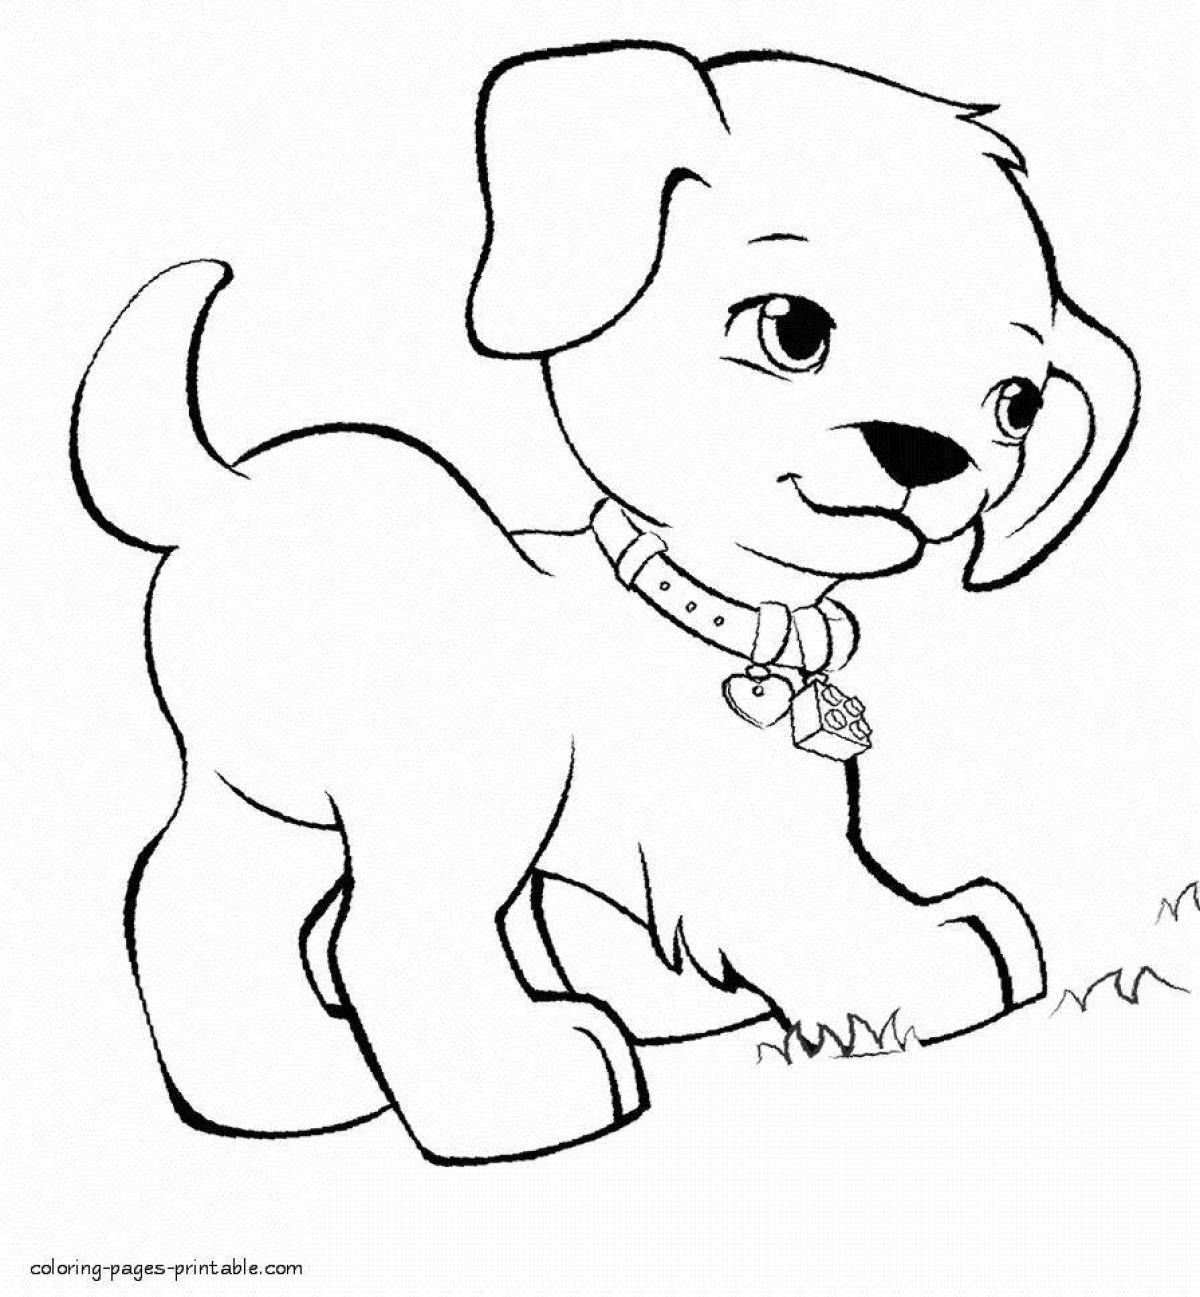 Sweet coloring pages animals cats and dogs